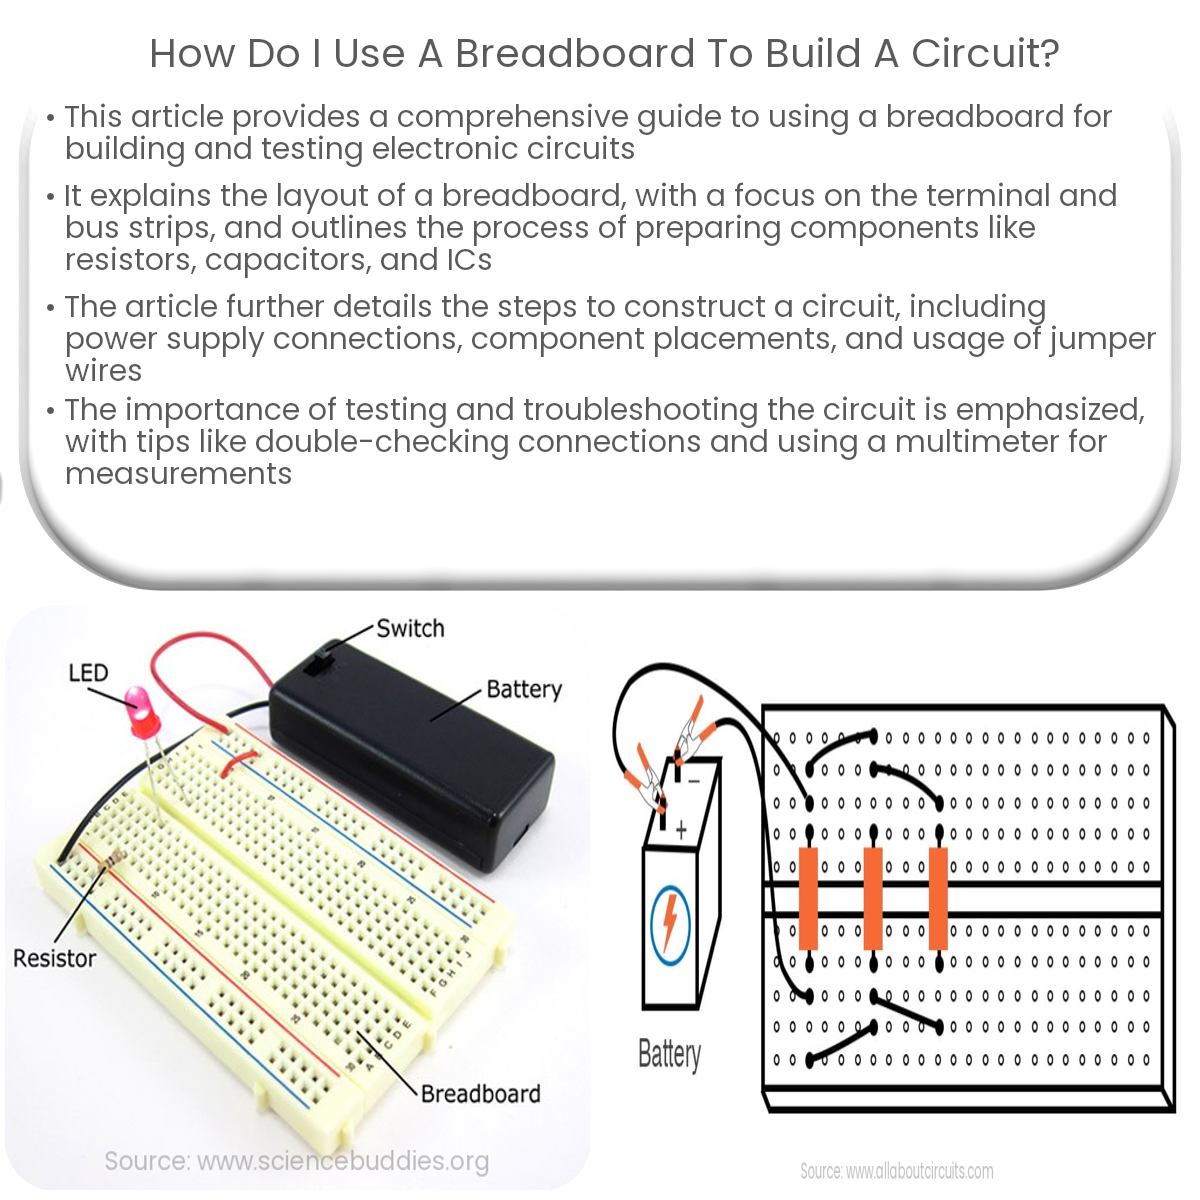 How To Use a Breadboard